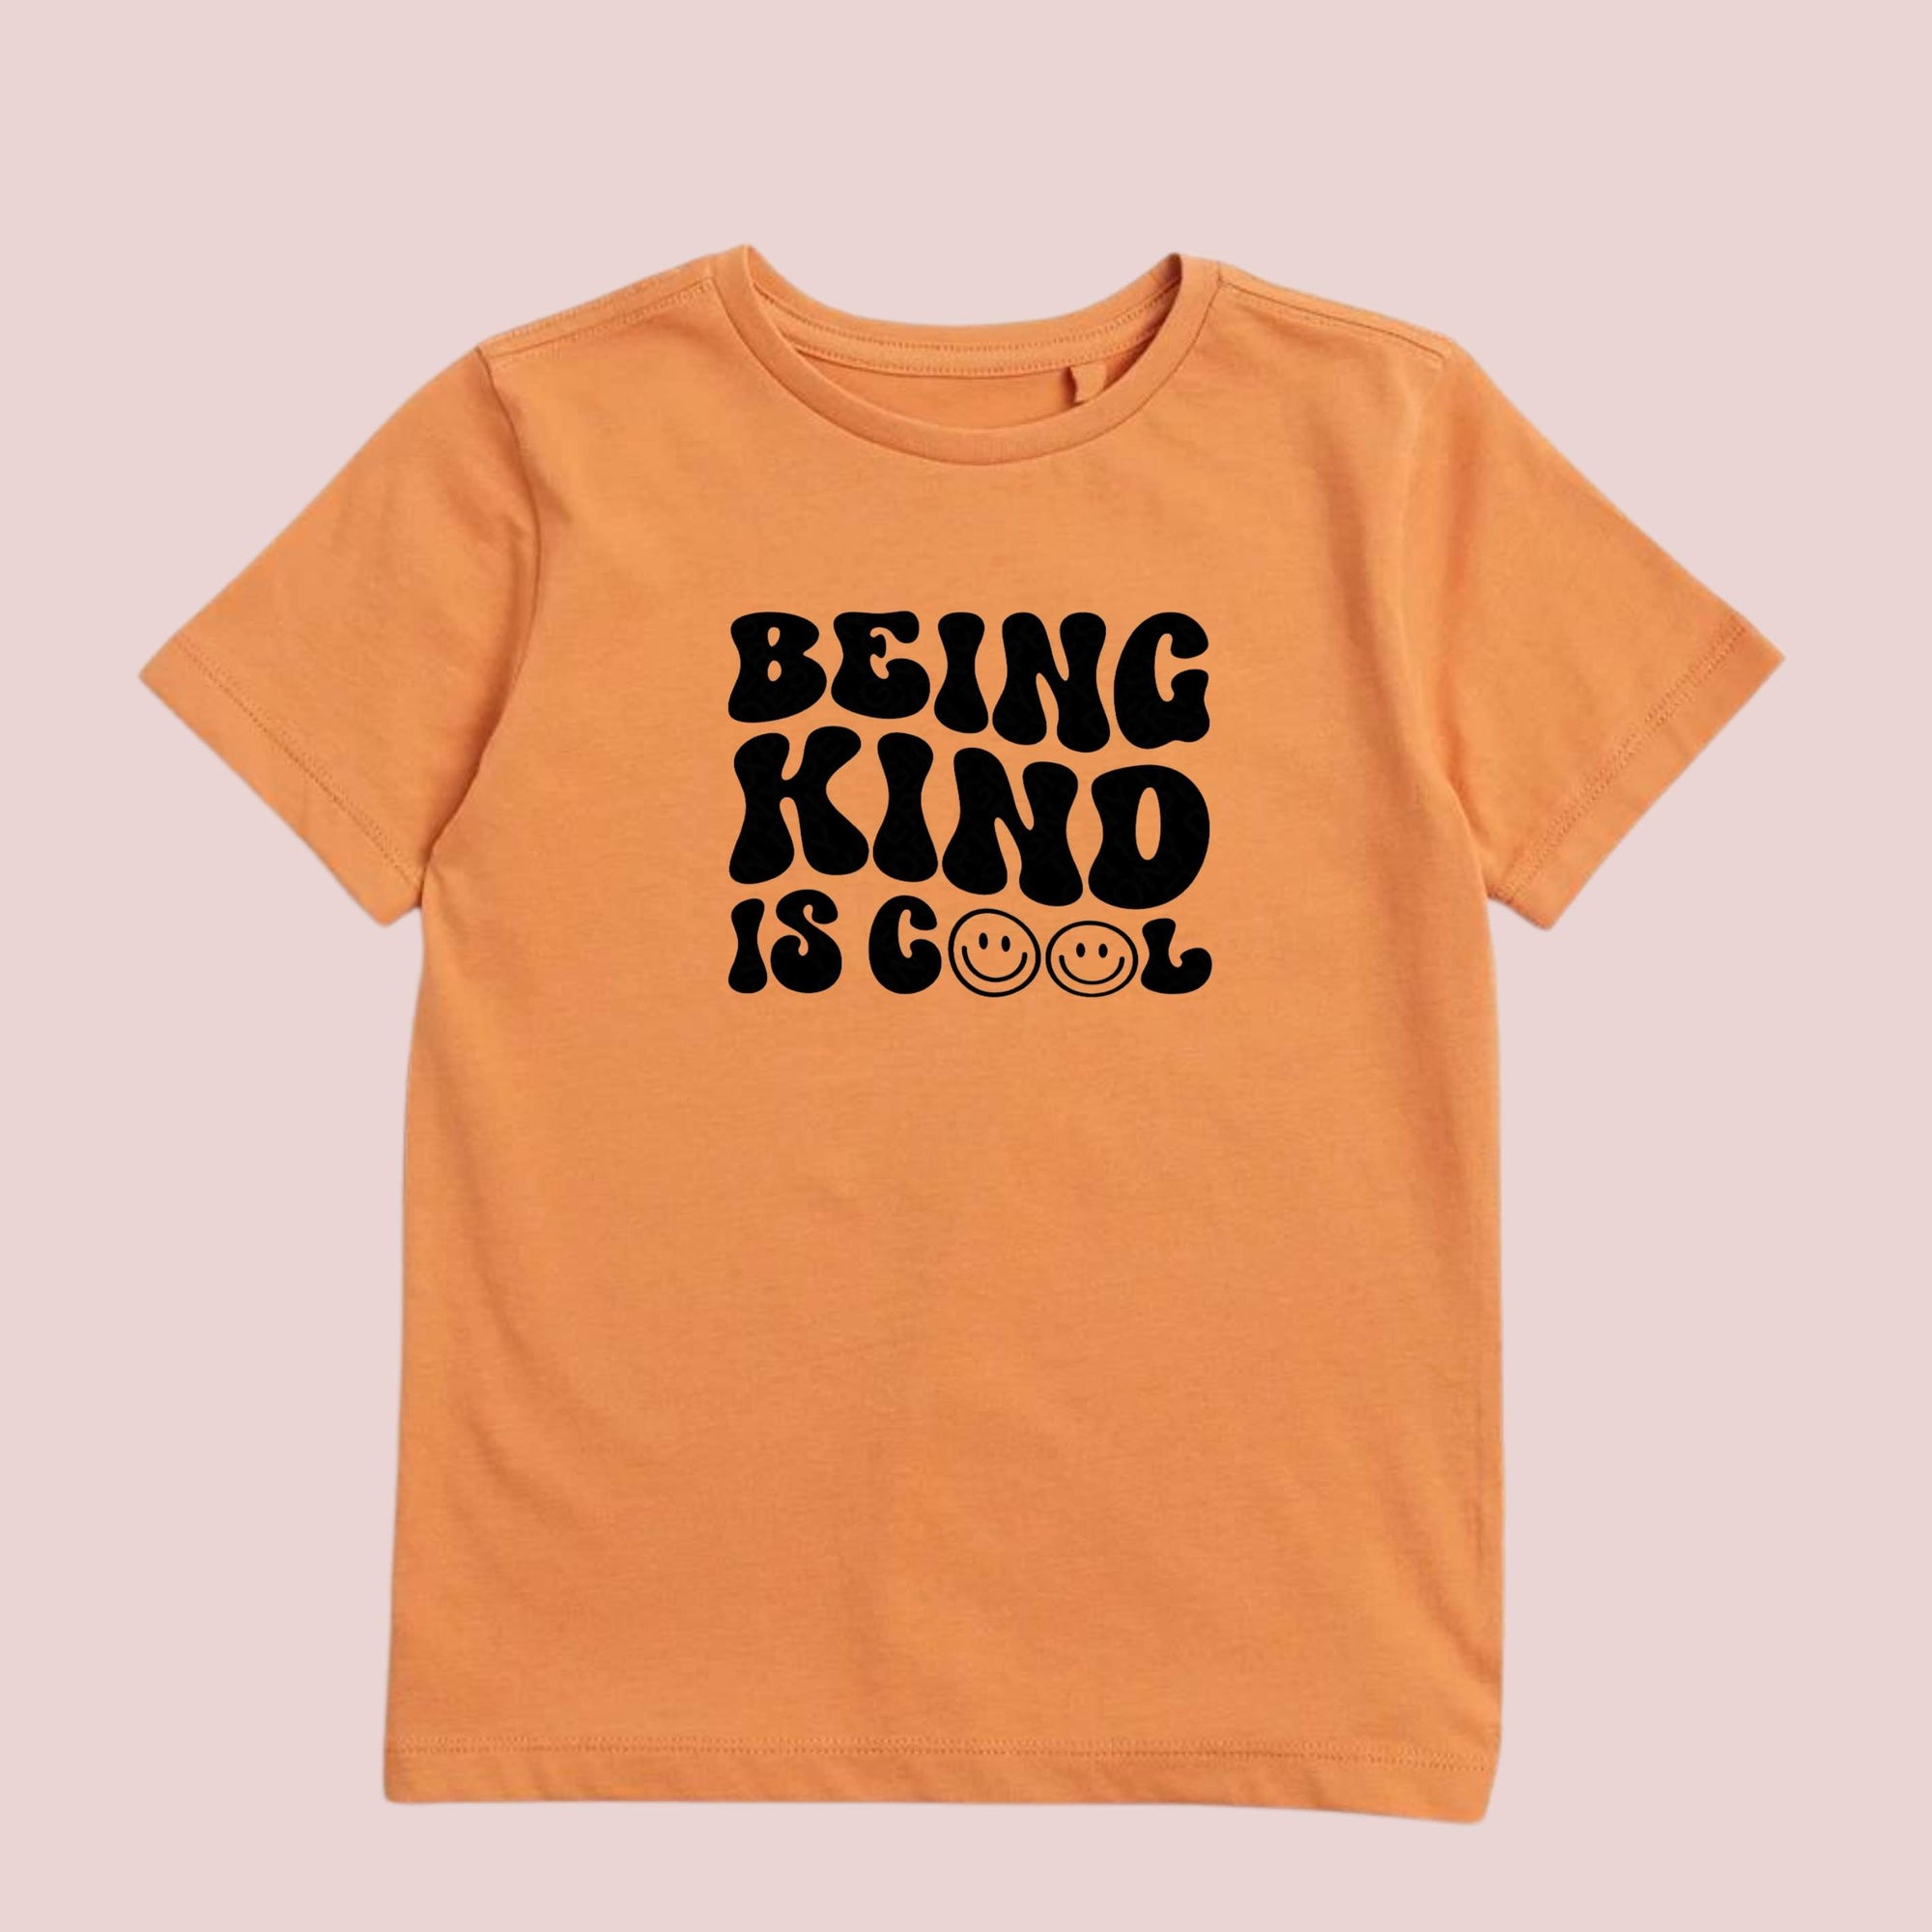 "Being Kind is Cool" T-shirt | Harmony Day